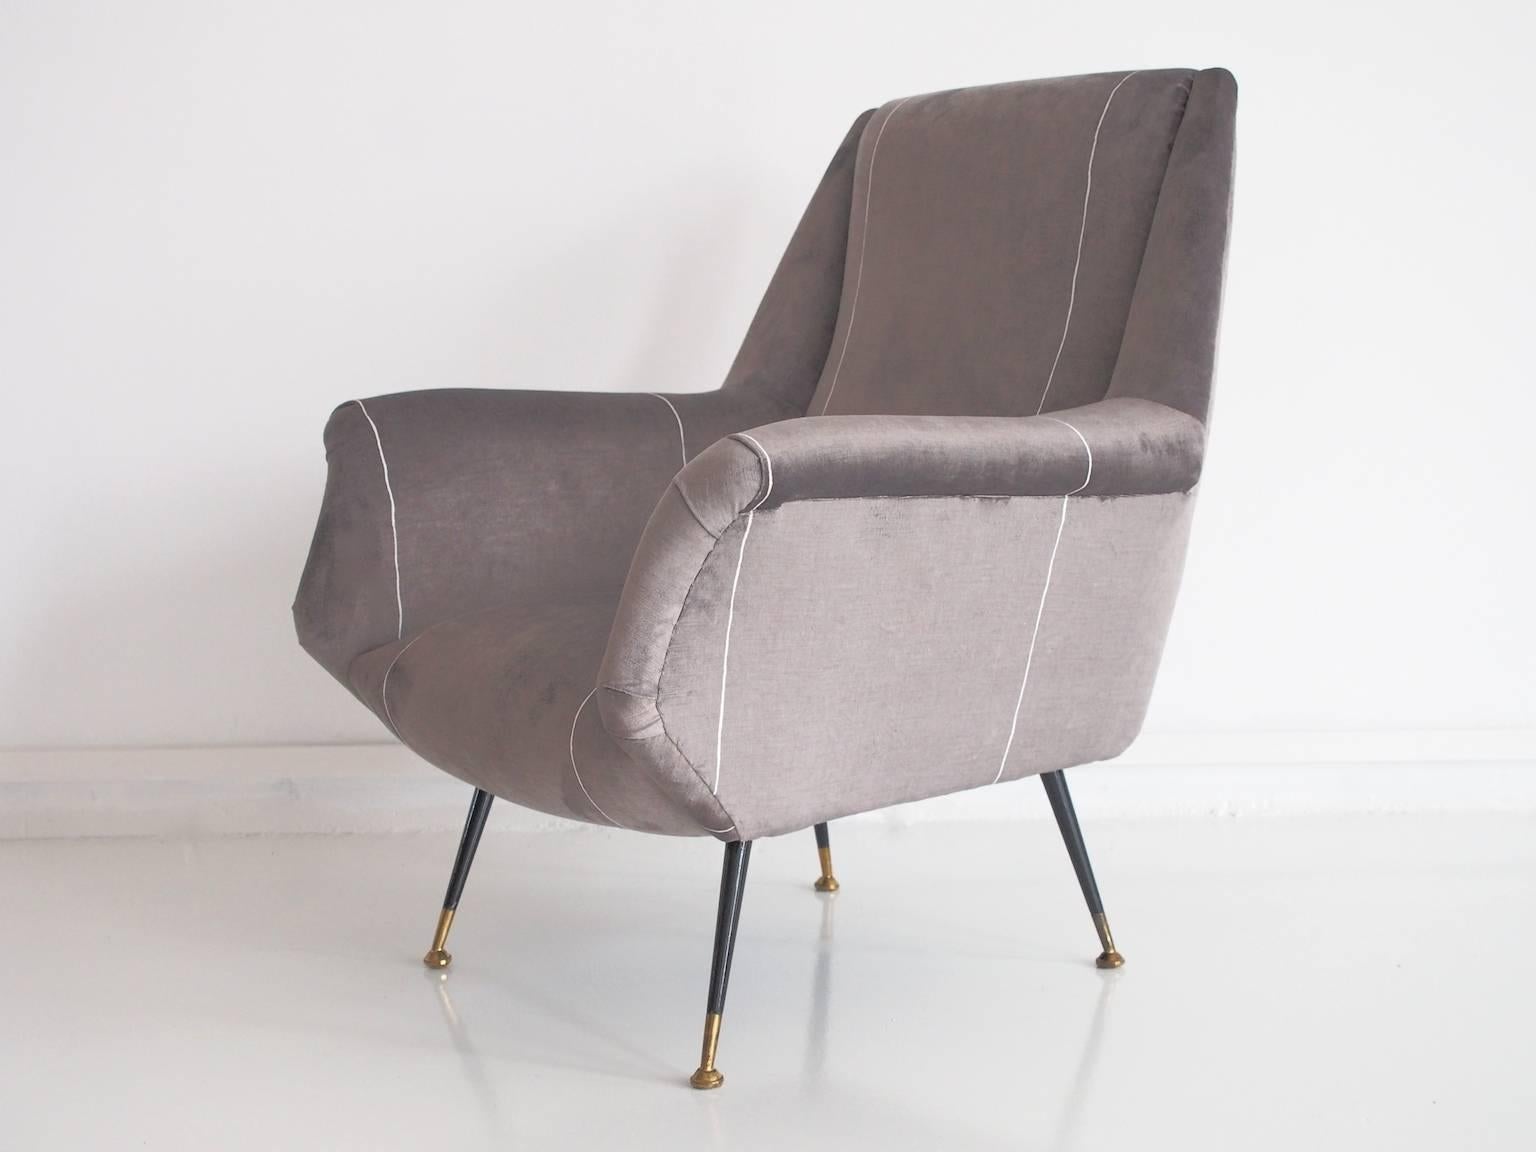 Newly upholstered Italian armchair in lightly striped grey velvet fabric with lacquered brass feet from circa 1950s.
Sofa in set also available, sold separately.